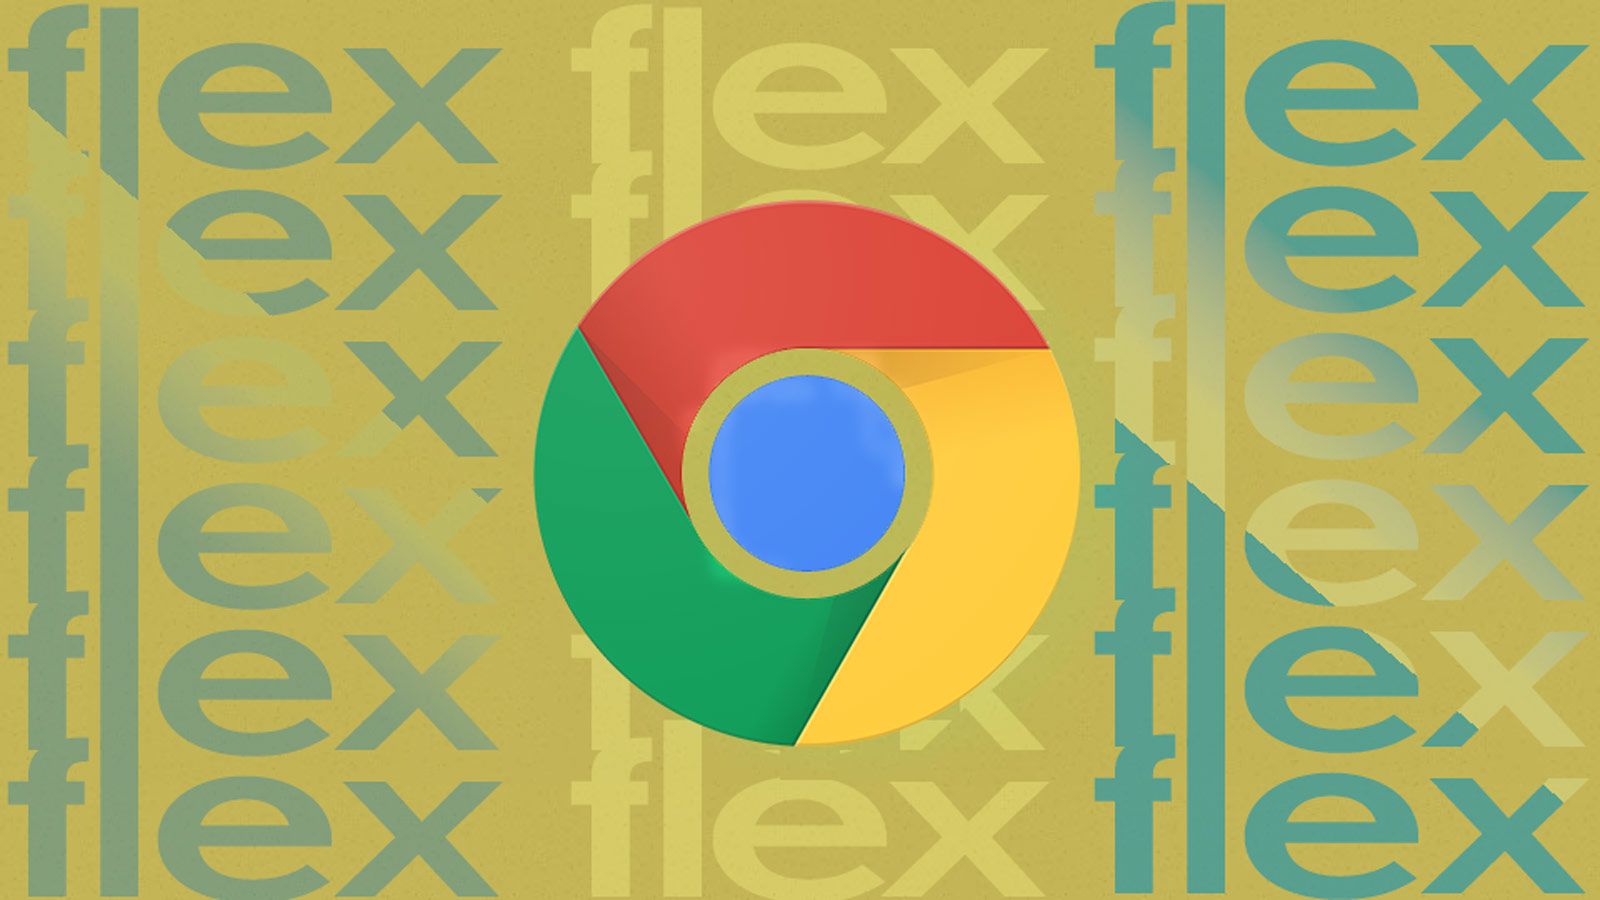 An illustration with the Google ball icon against a yellow background with the text 